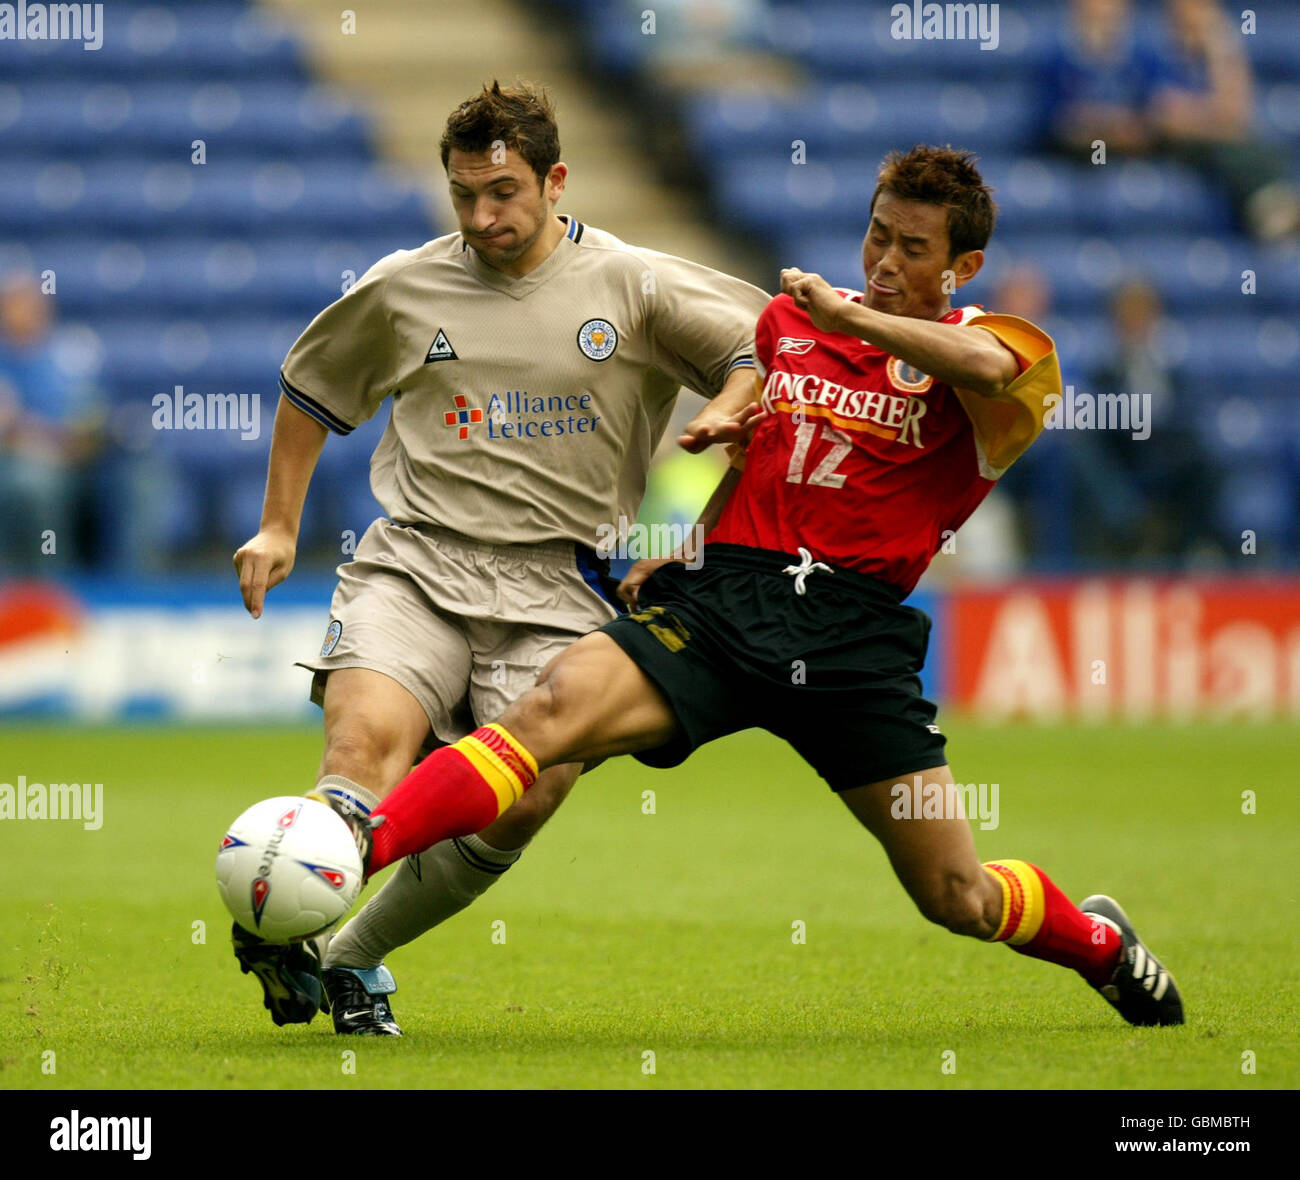 Soccer - Pepsi Max Challenge Tournament - Leicester City v East Bengal. Leicester City's Peter Canero and East Bengal's Bhaichung Bhutia Stock Photo